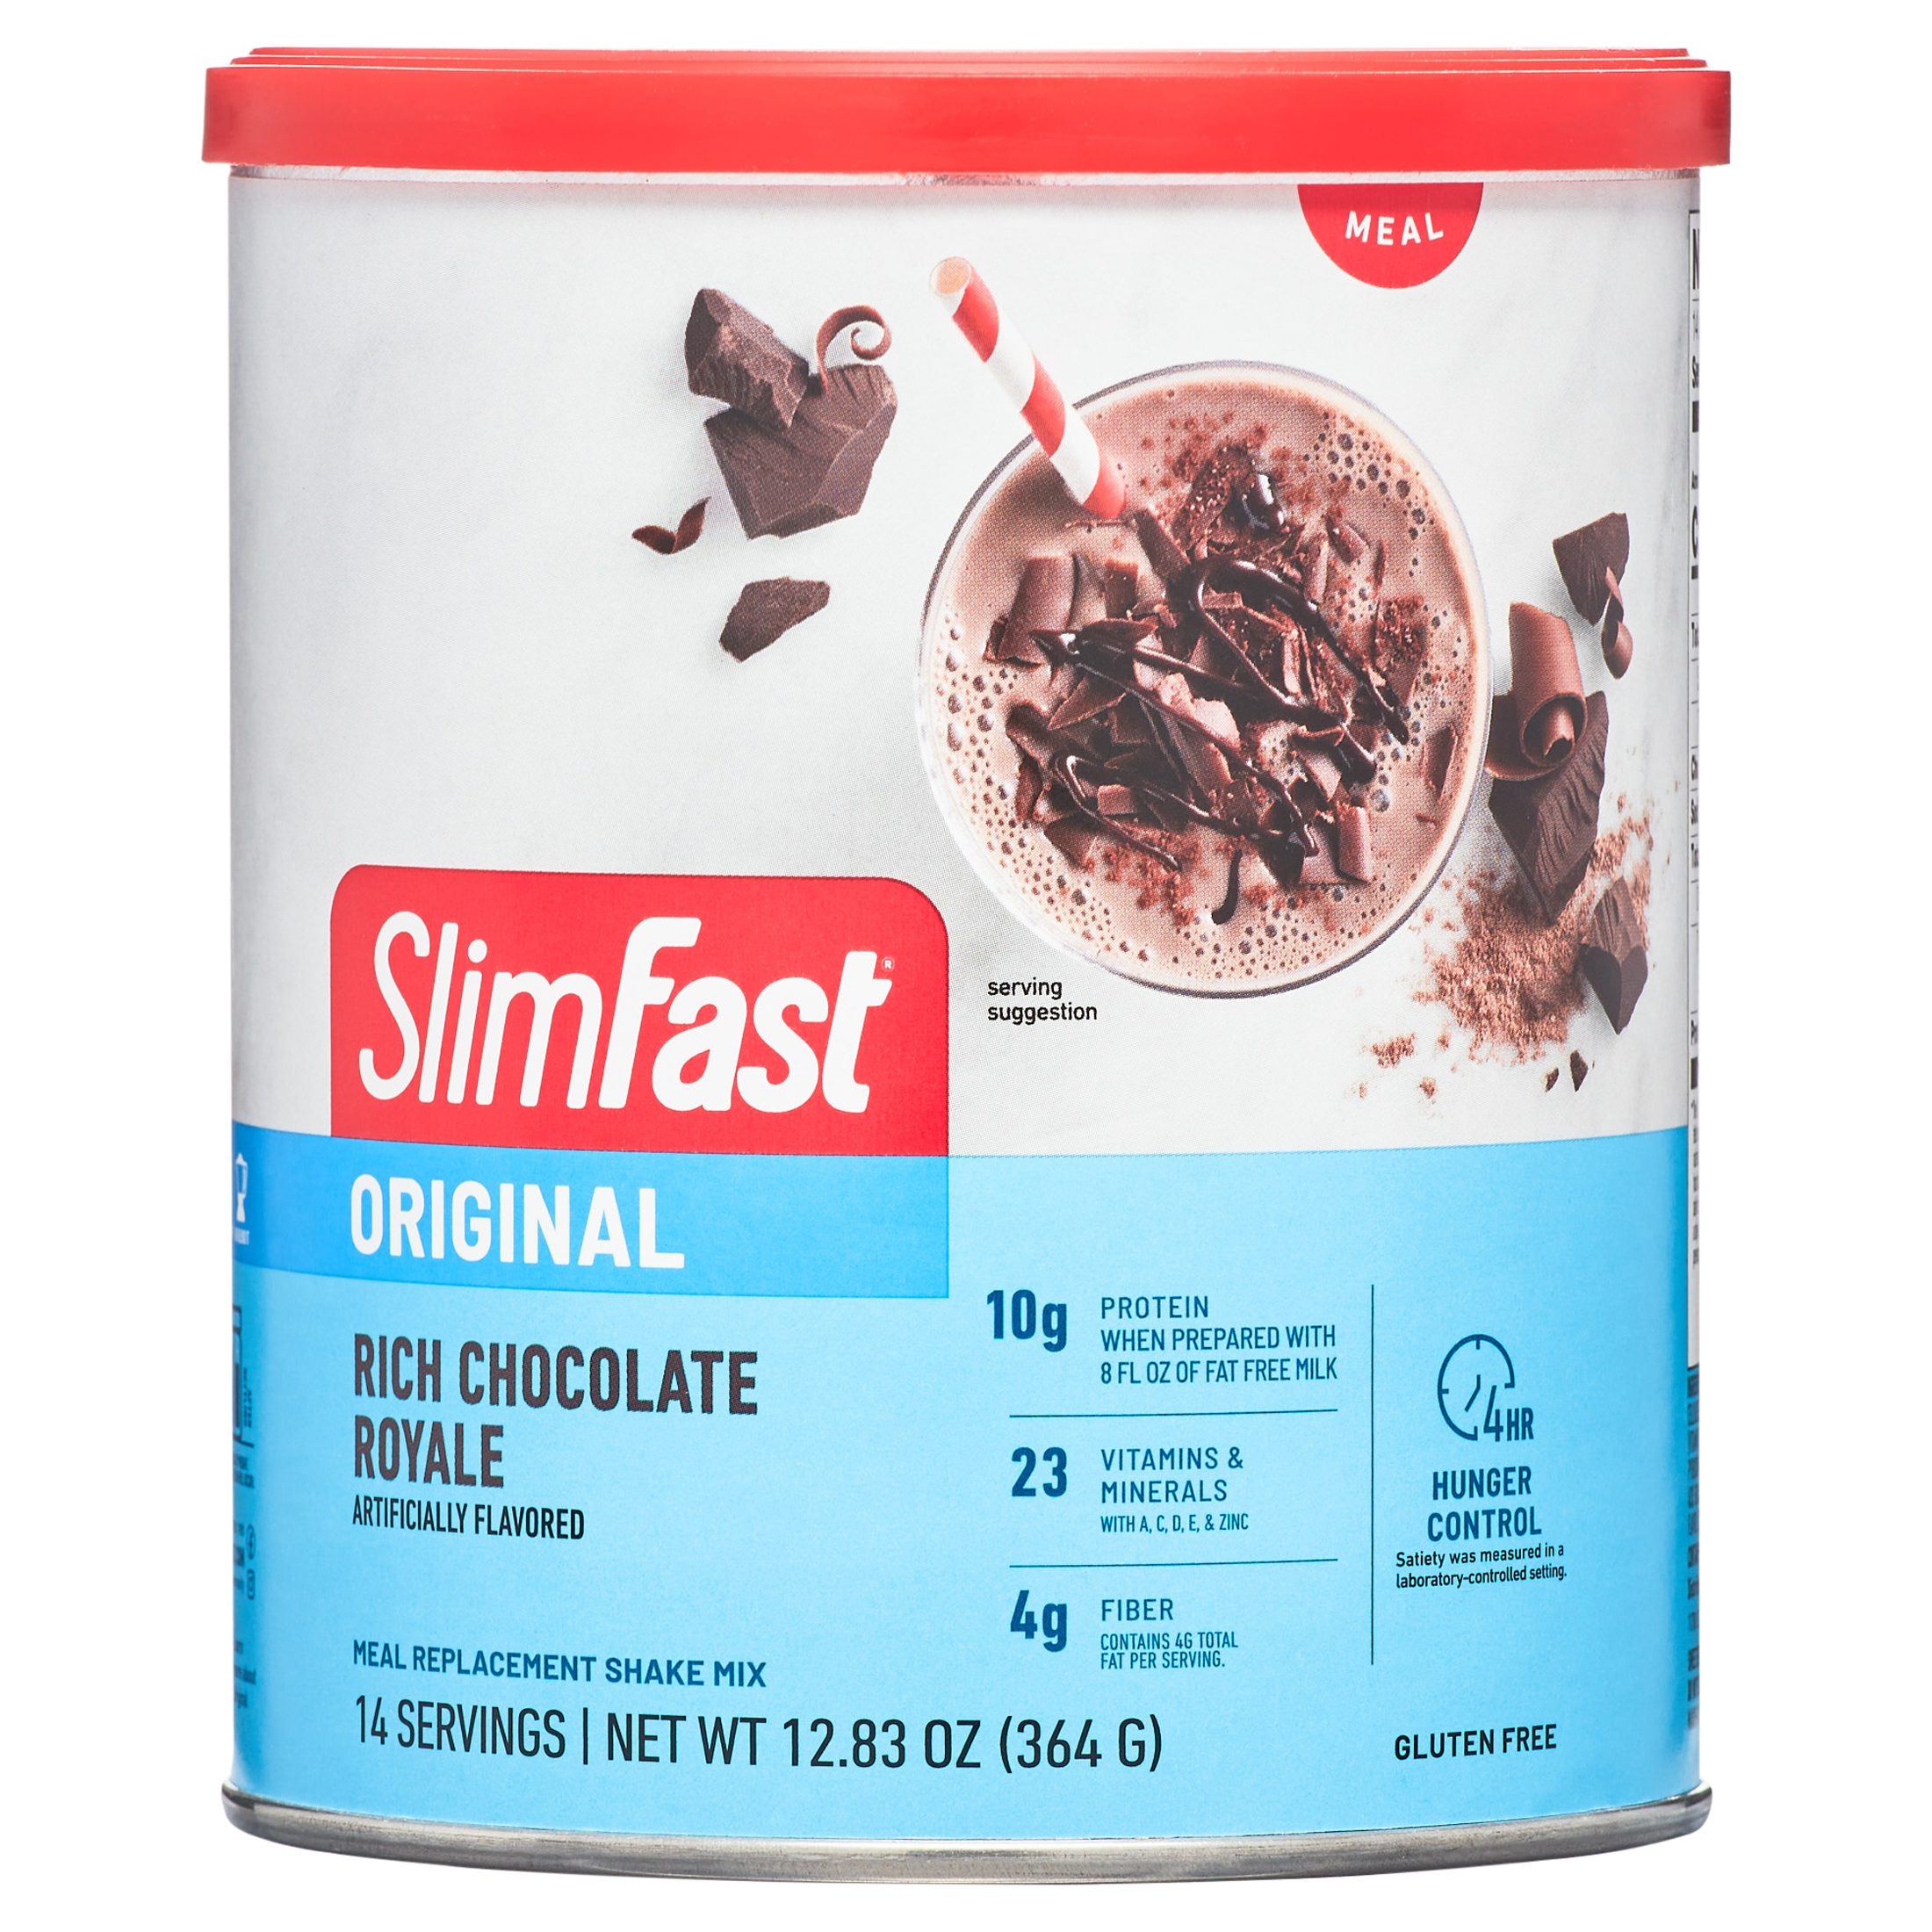 SlimFast Original Meal Replacement Shake Mix, Rich Milk Chocolate,12.83 Oz - image 1 of 9